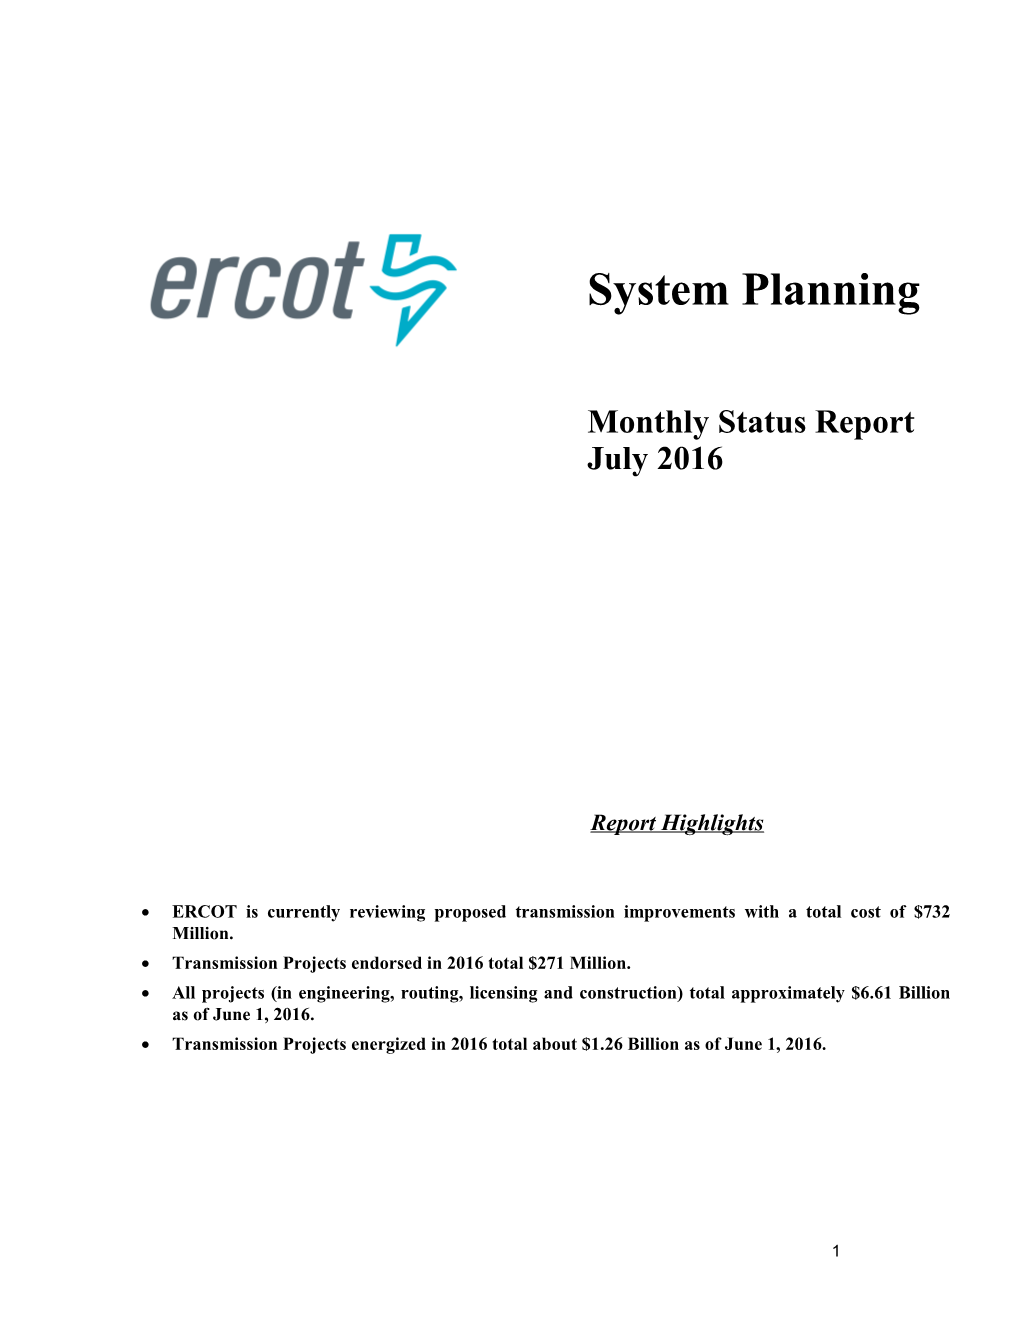 ERCOT Is Currently Reviewing Proposed Transmission Improvements with a Total Cost of $732